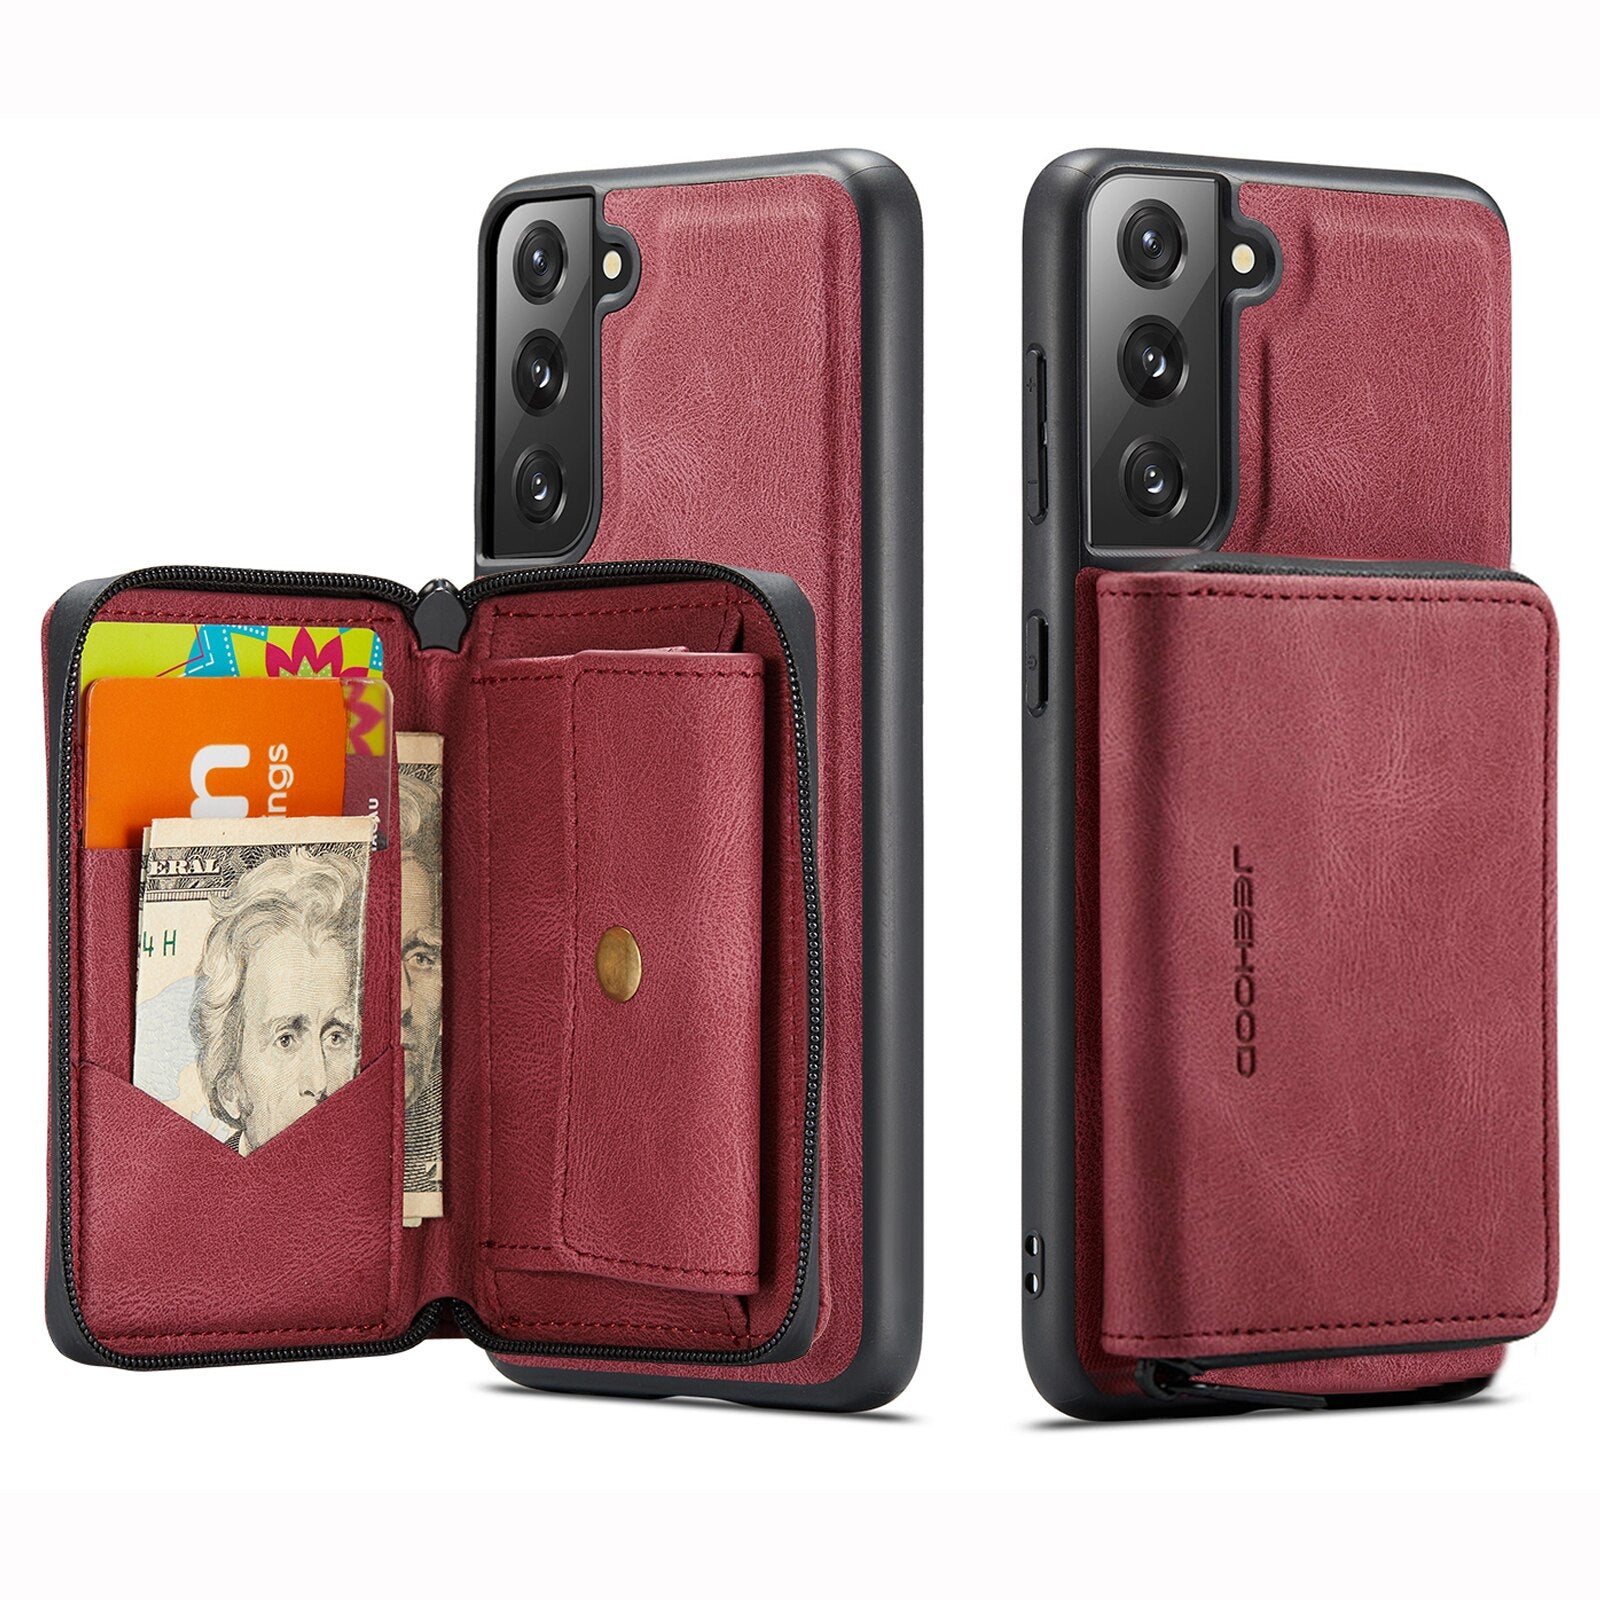 PU Leather Wallet Case For Samsung Galaxy S22 Ultra S22+ S22 5G S21 FE Case Card Solt Bag Magnetic Support Wireless Charging - 0 For Galaxy S21 FE / Red / United States Find Epic Store